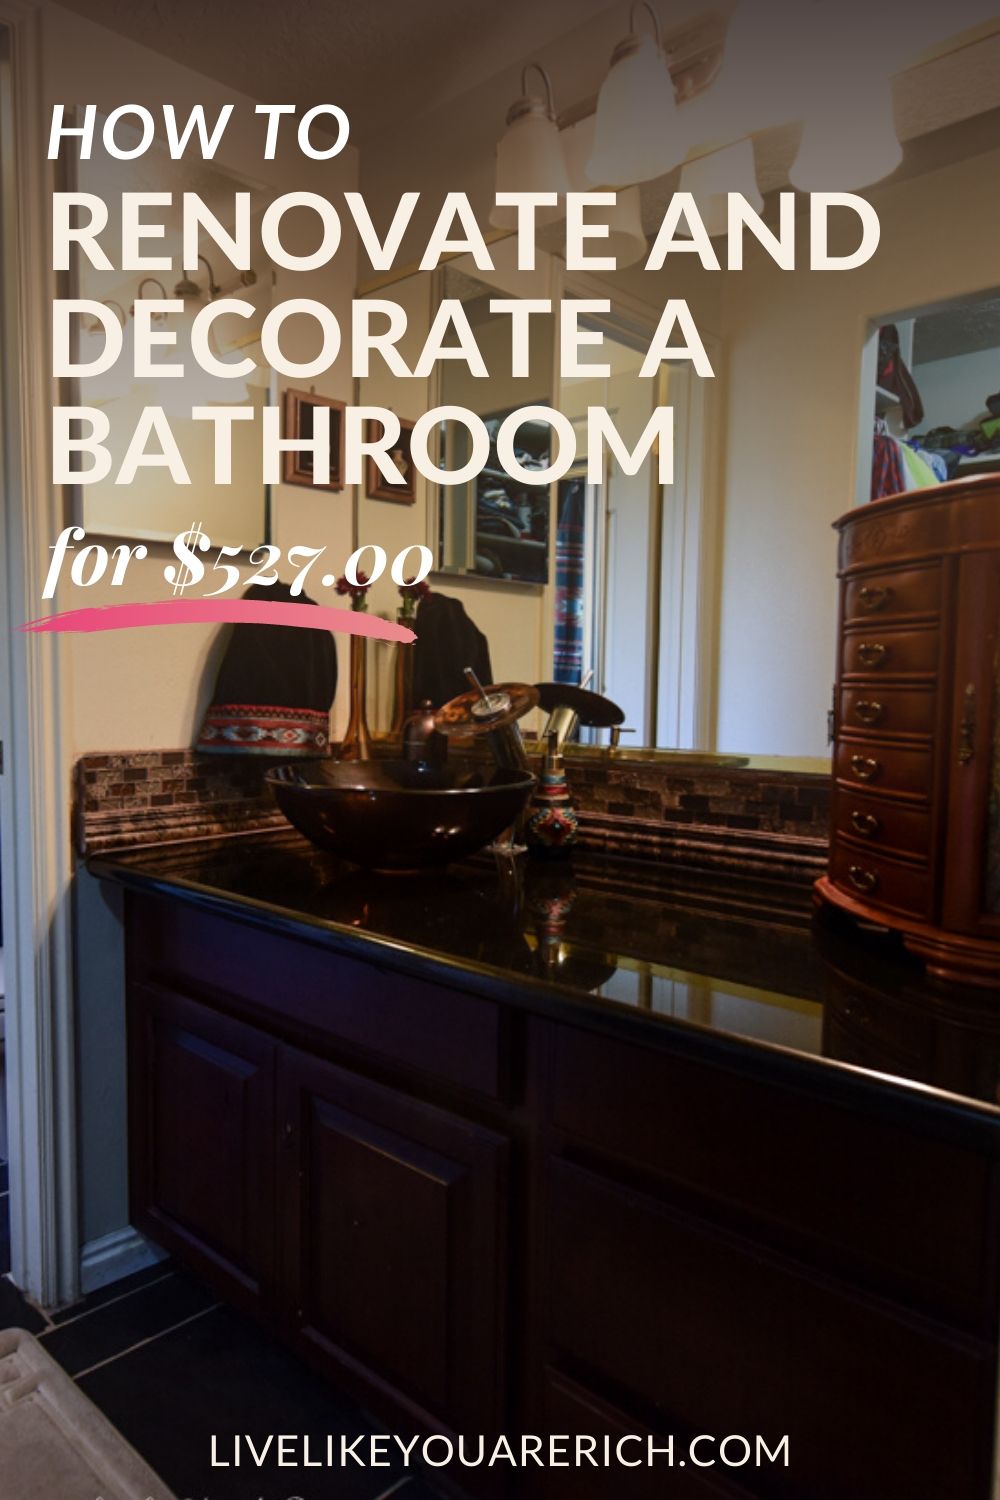 The average inexpensive DIY bathroom renovation is about $5,000. For just over $500 we were able to almost completely renovate, paint, and decorate our bathroom. I’m sharing how we did our bathroom renovation on a budget.